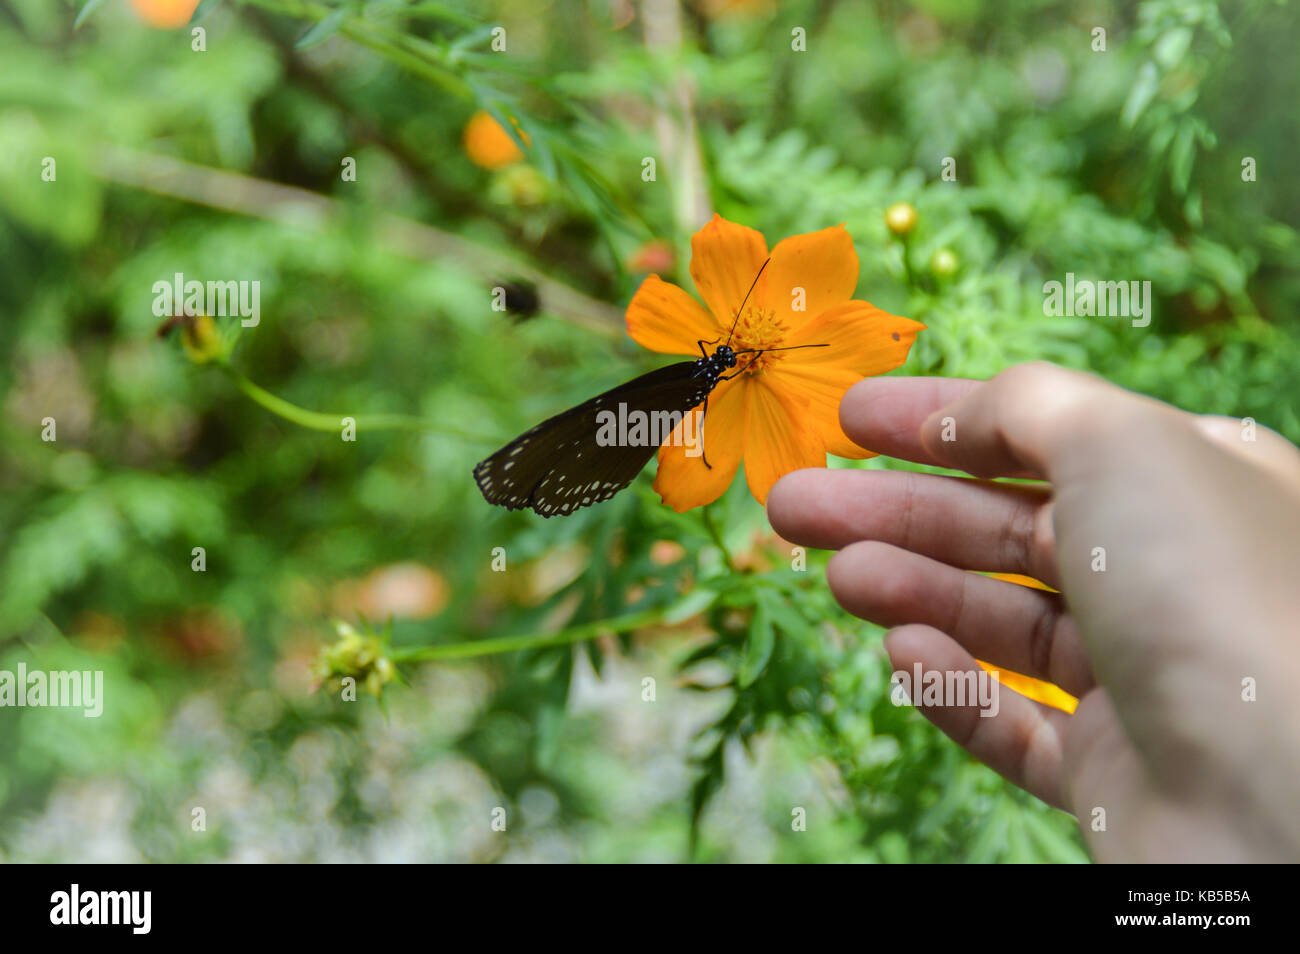 A butterfly resting on a marigold flower near a human hand, showing the harmony of humanity and nature concept Stock Photo